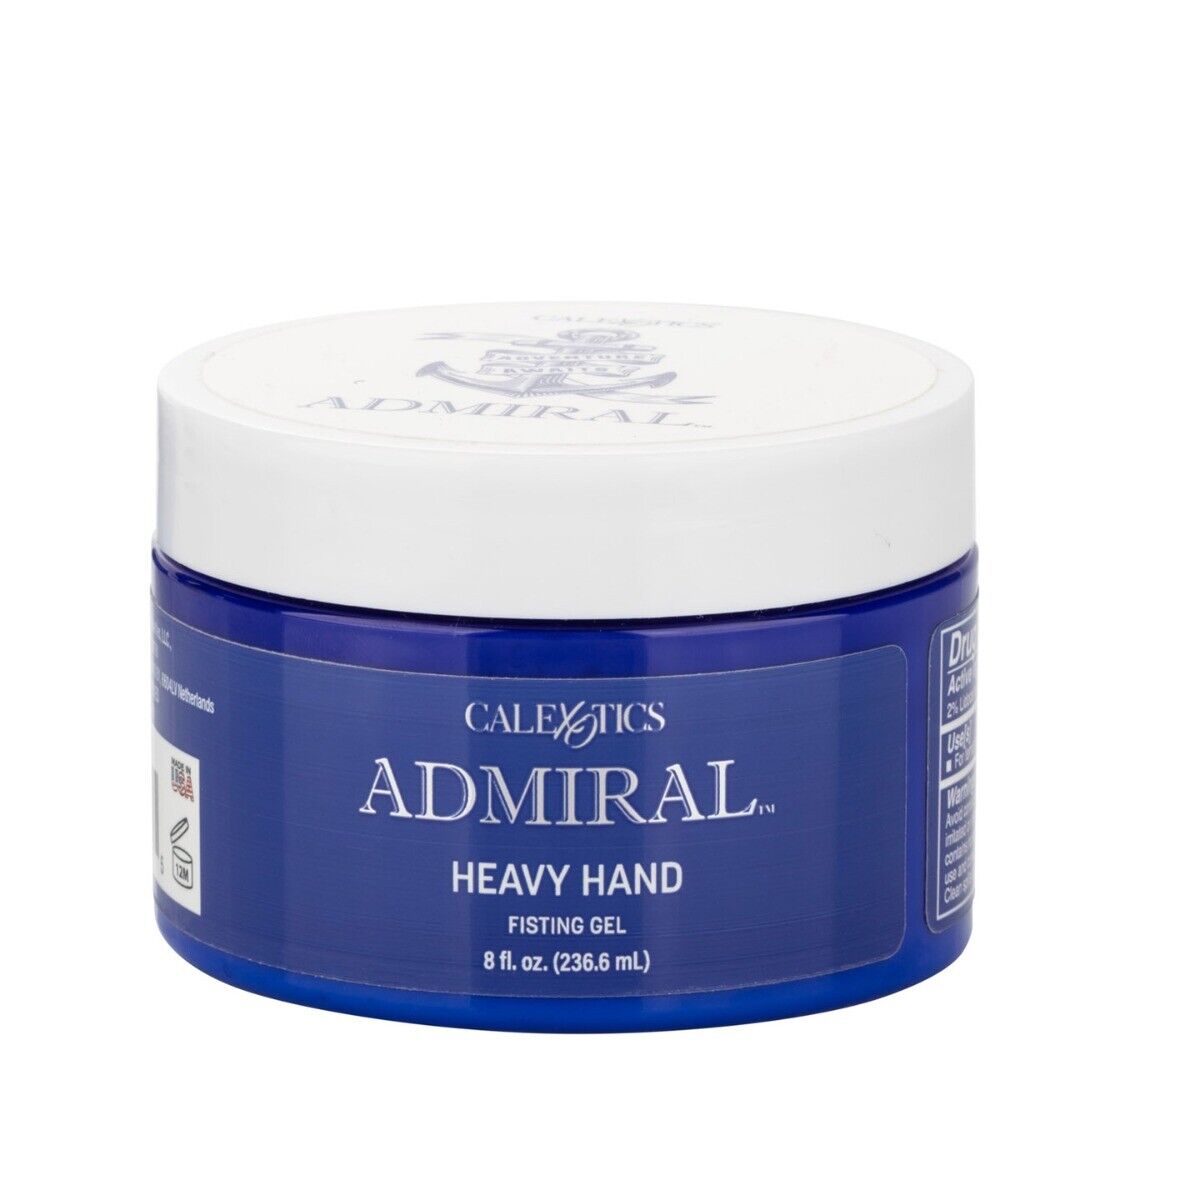 Admiral Heavy Hand Fisting Play Gel Cream Desensitizing Personal Anal Lubricant